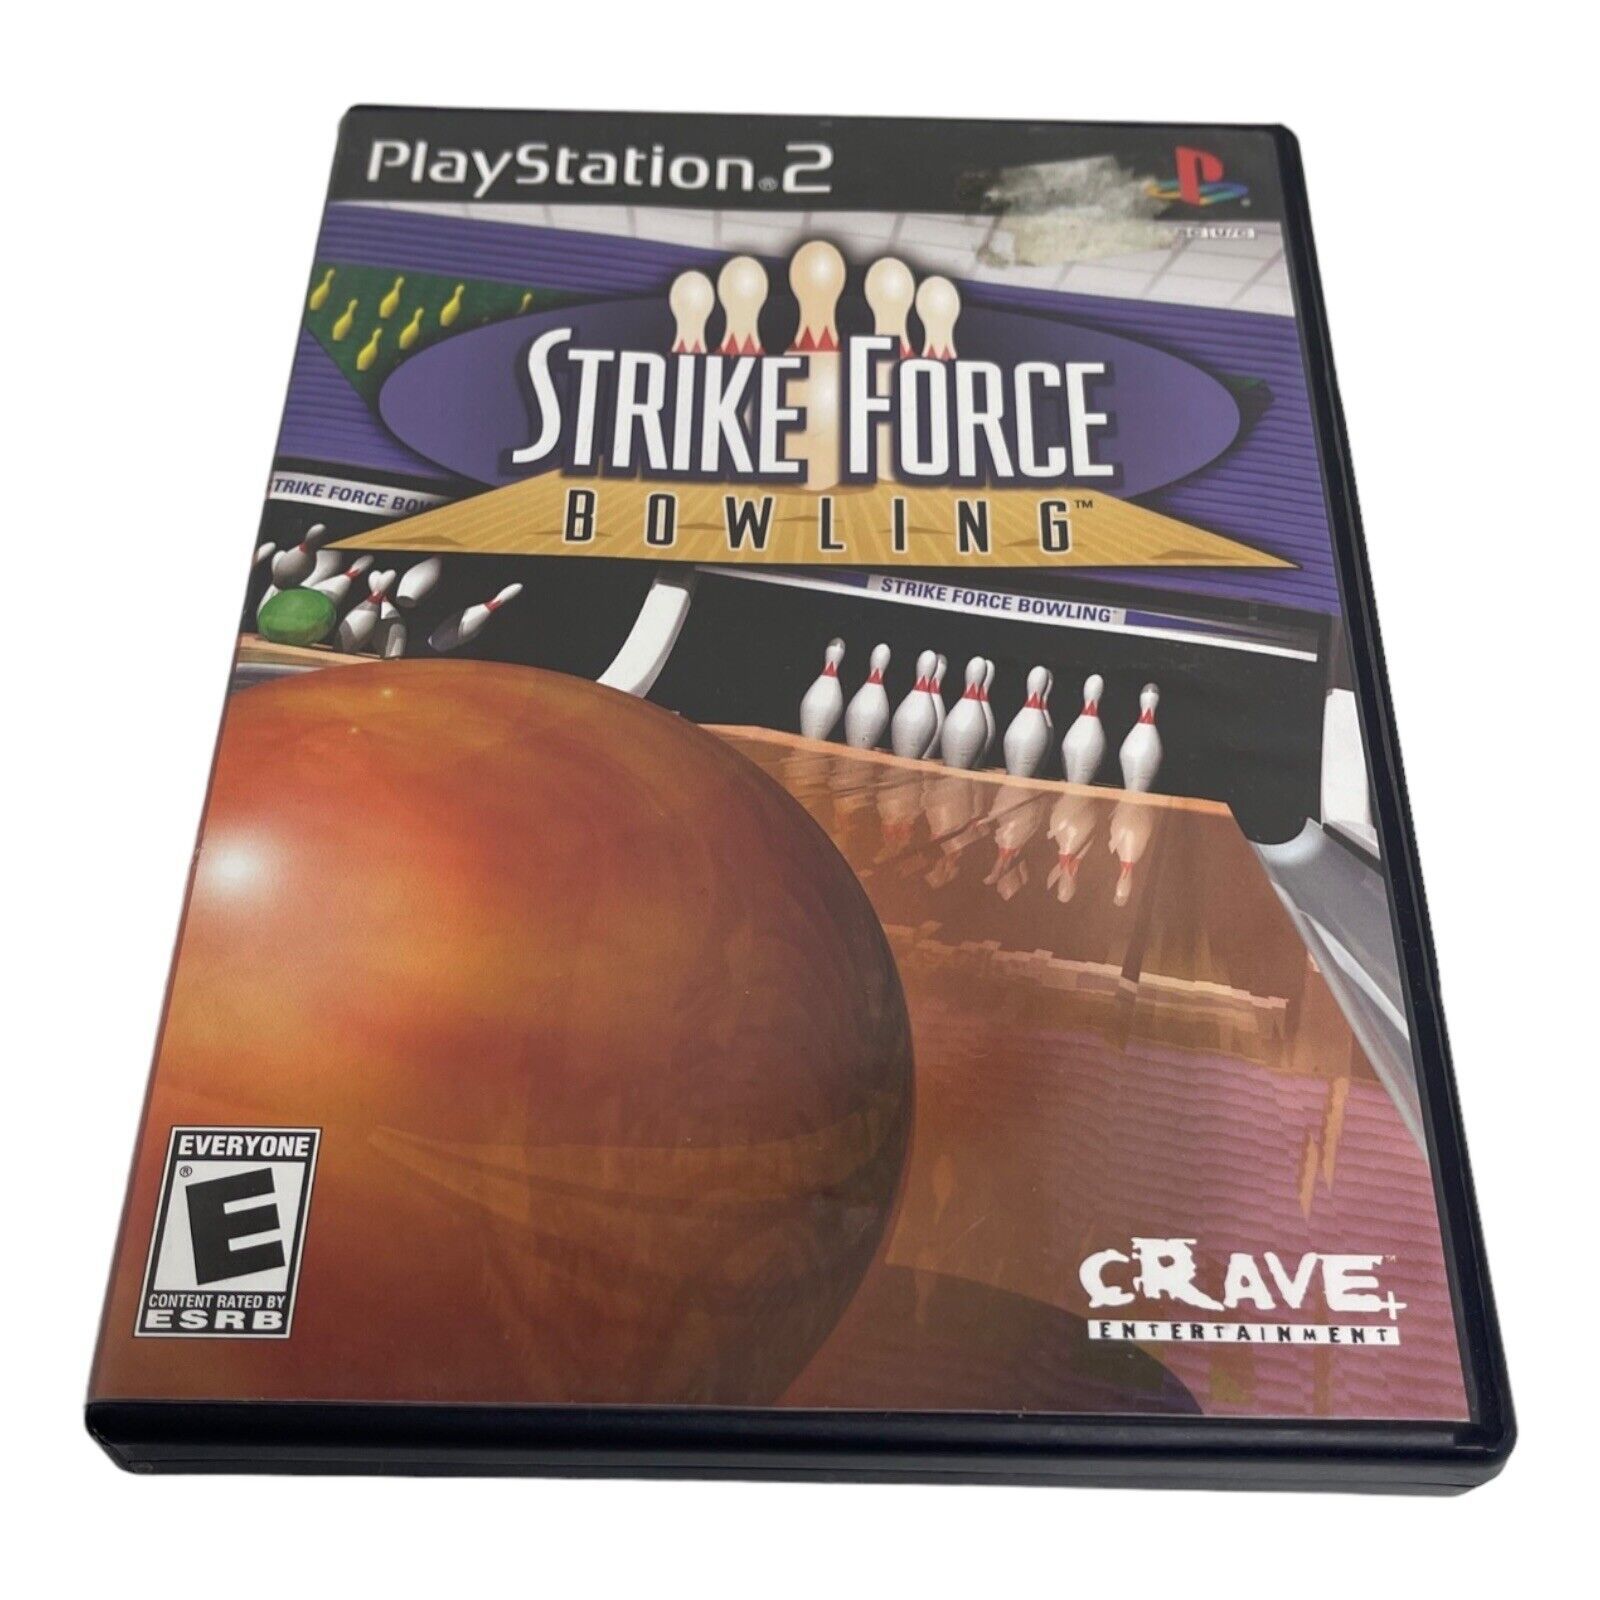 Primary image for Strike Force Bowling (Sony PlayStation 2, 2004) PS2 game complete